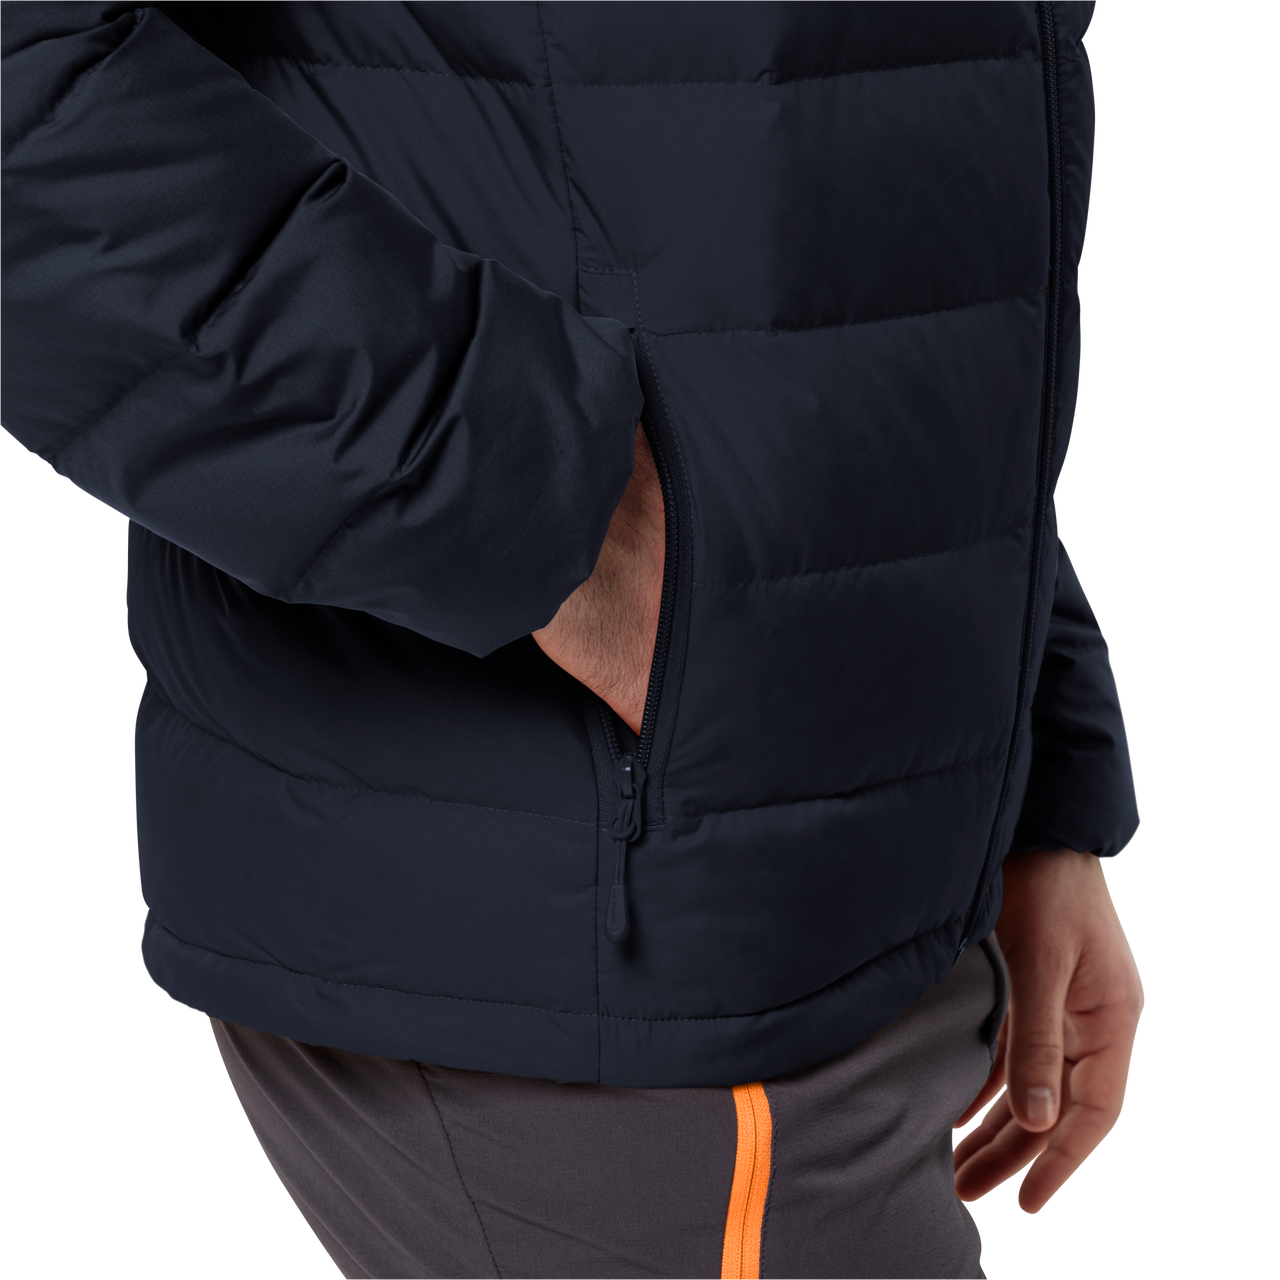 Men's Ather Down Hooded Jacket